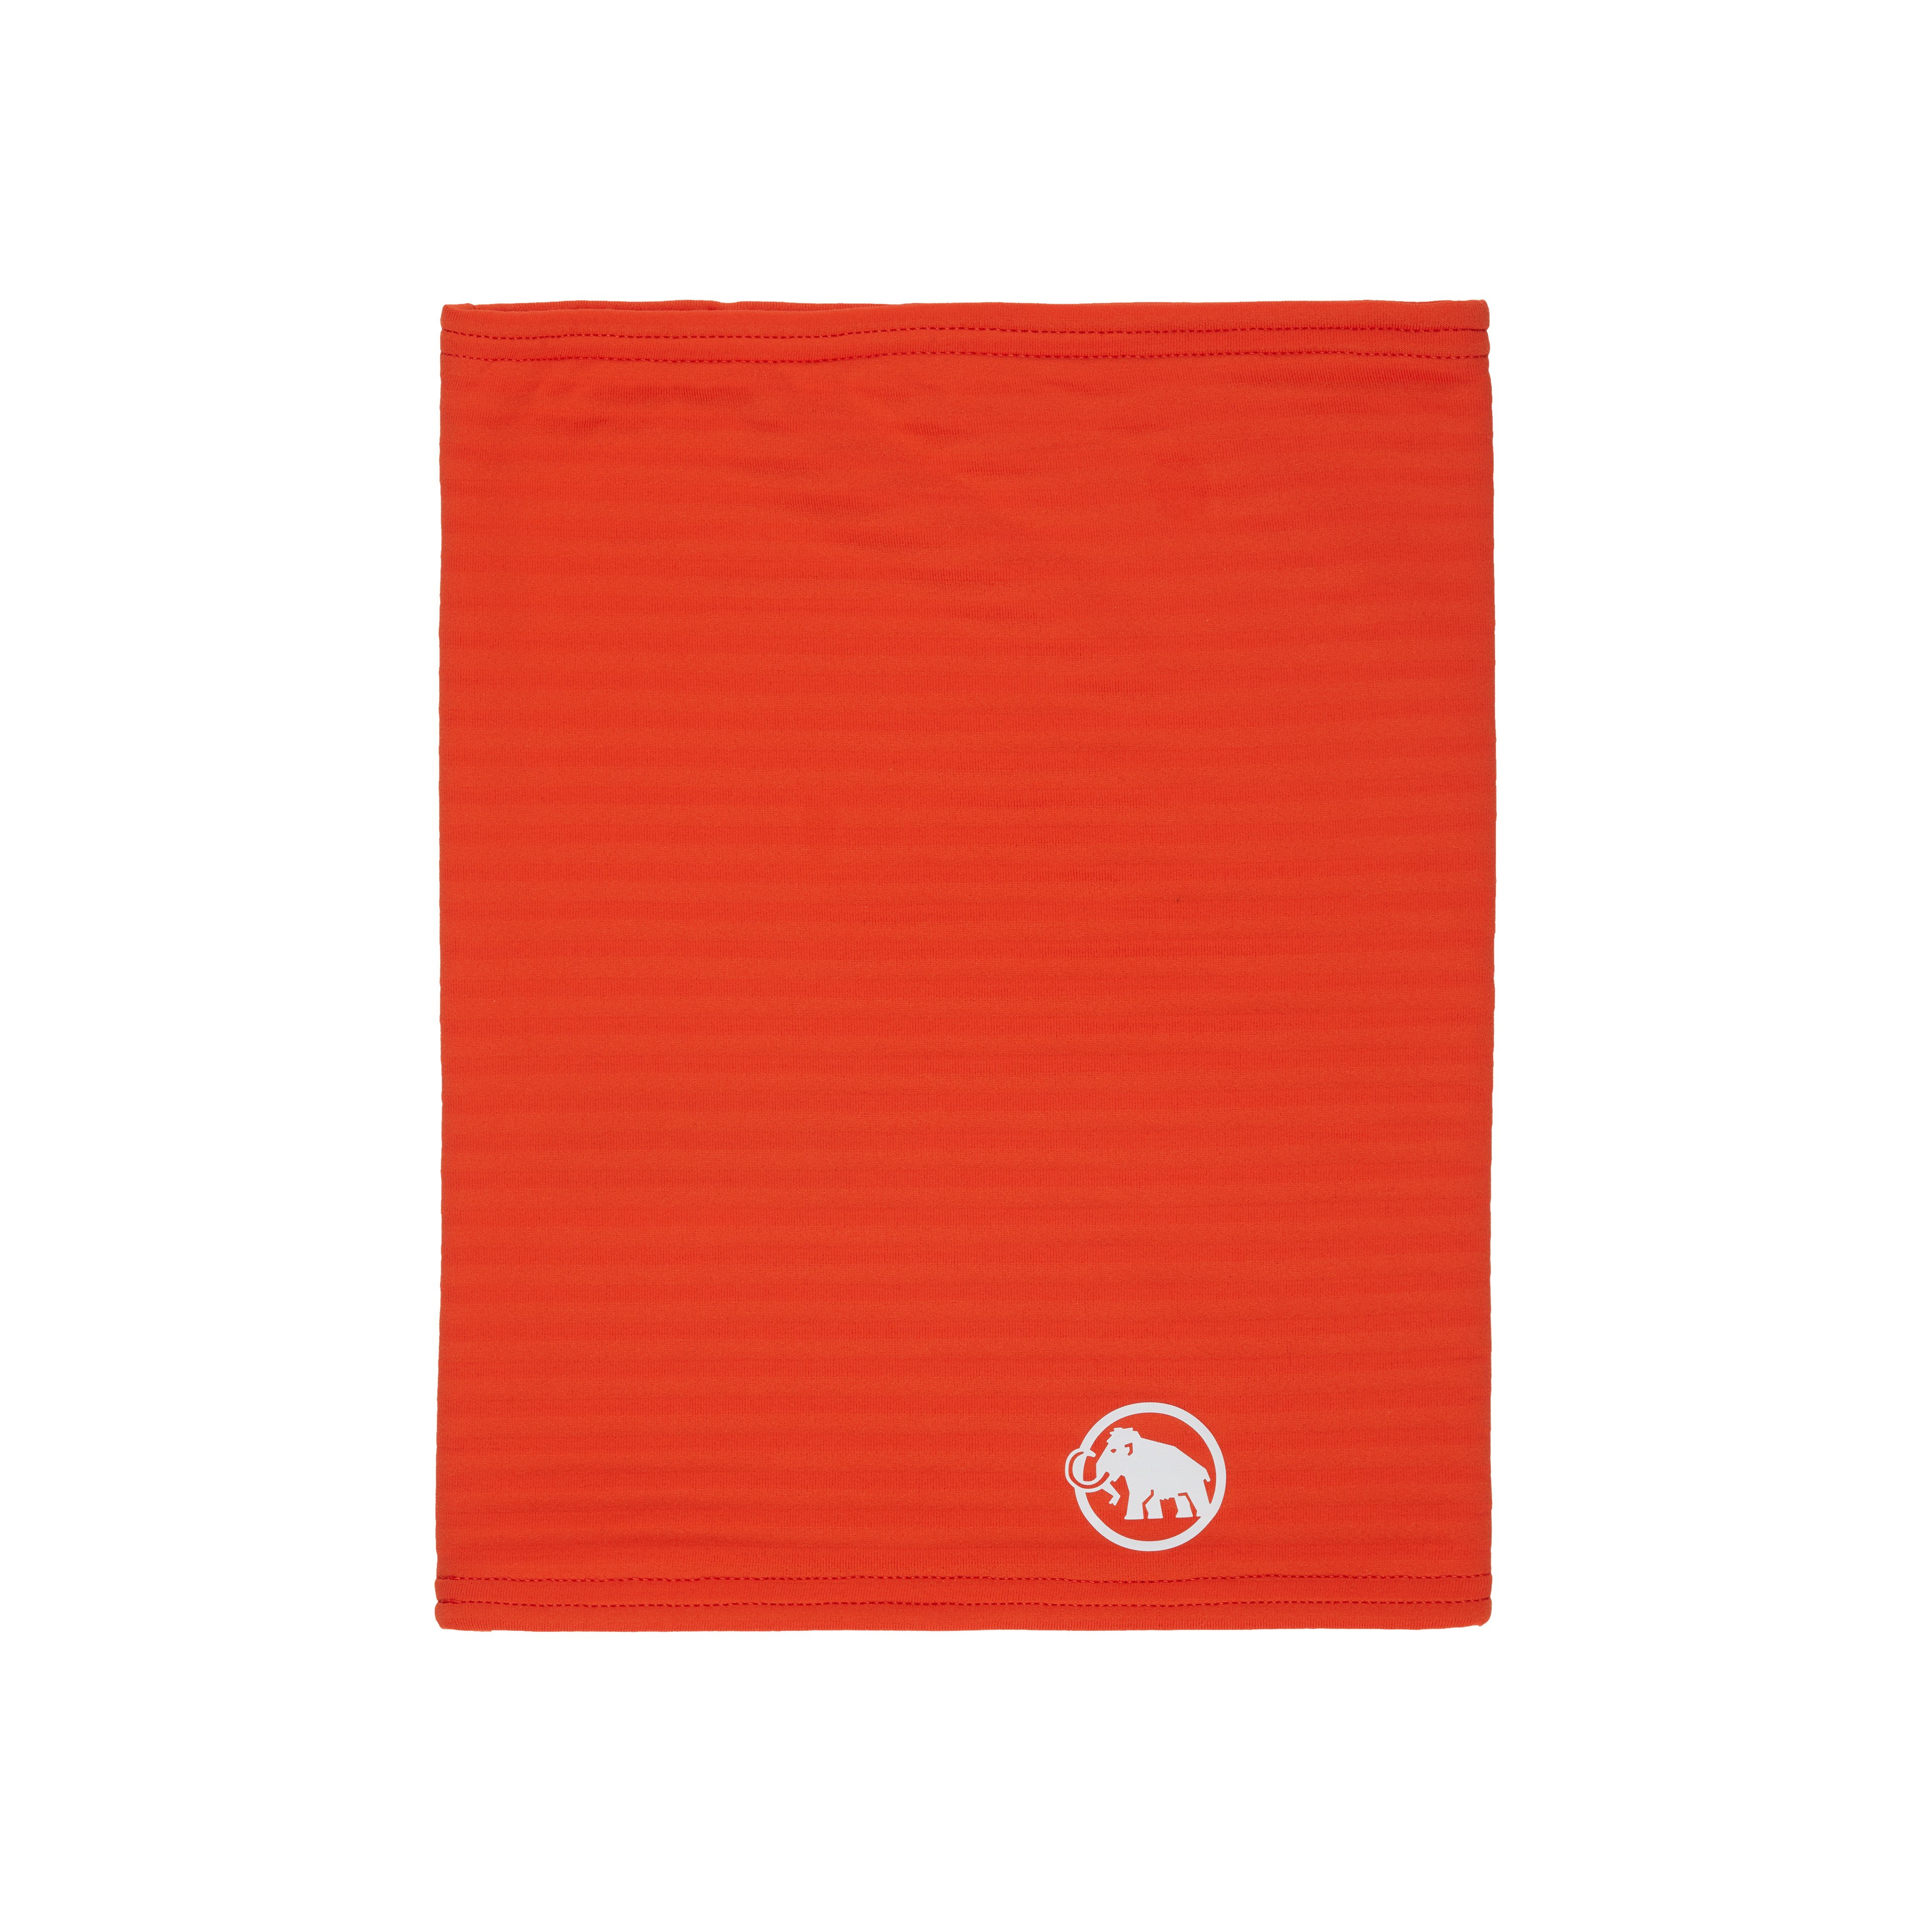 Taiss Light Neck Gaiter - hot red, one size product image